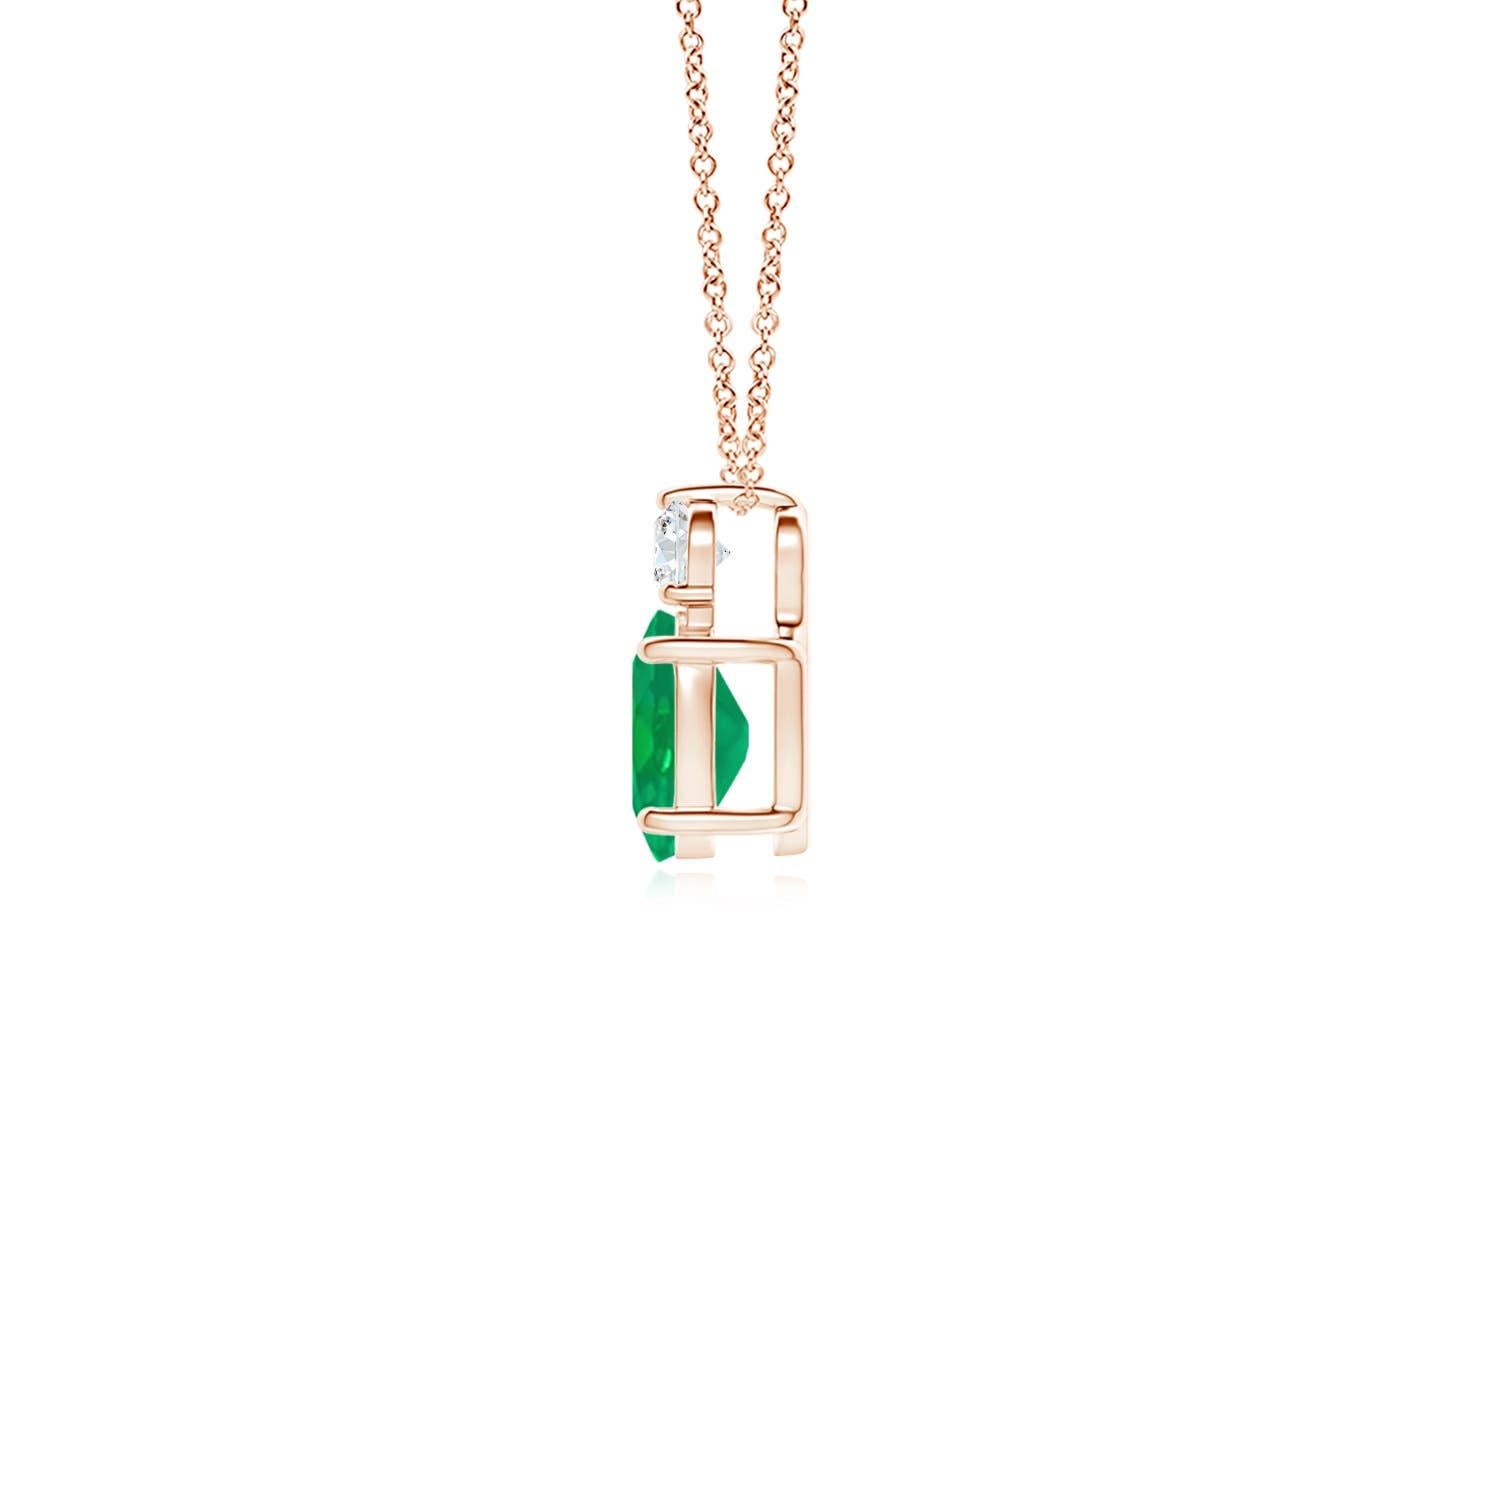 Crafted in 14k rose gold, this classic solitaire emerald pendant personifies elegance. The rich green oval emerald is topped by a sparkling diamond for added allure. The intricate scroll work on the sides enhances this prong set emerald pendant's